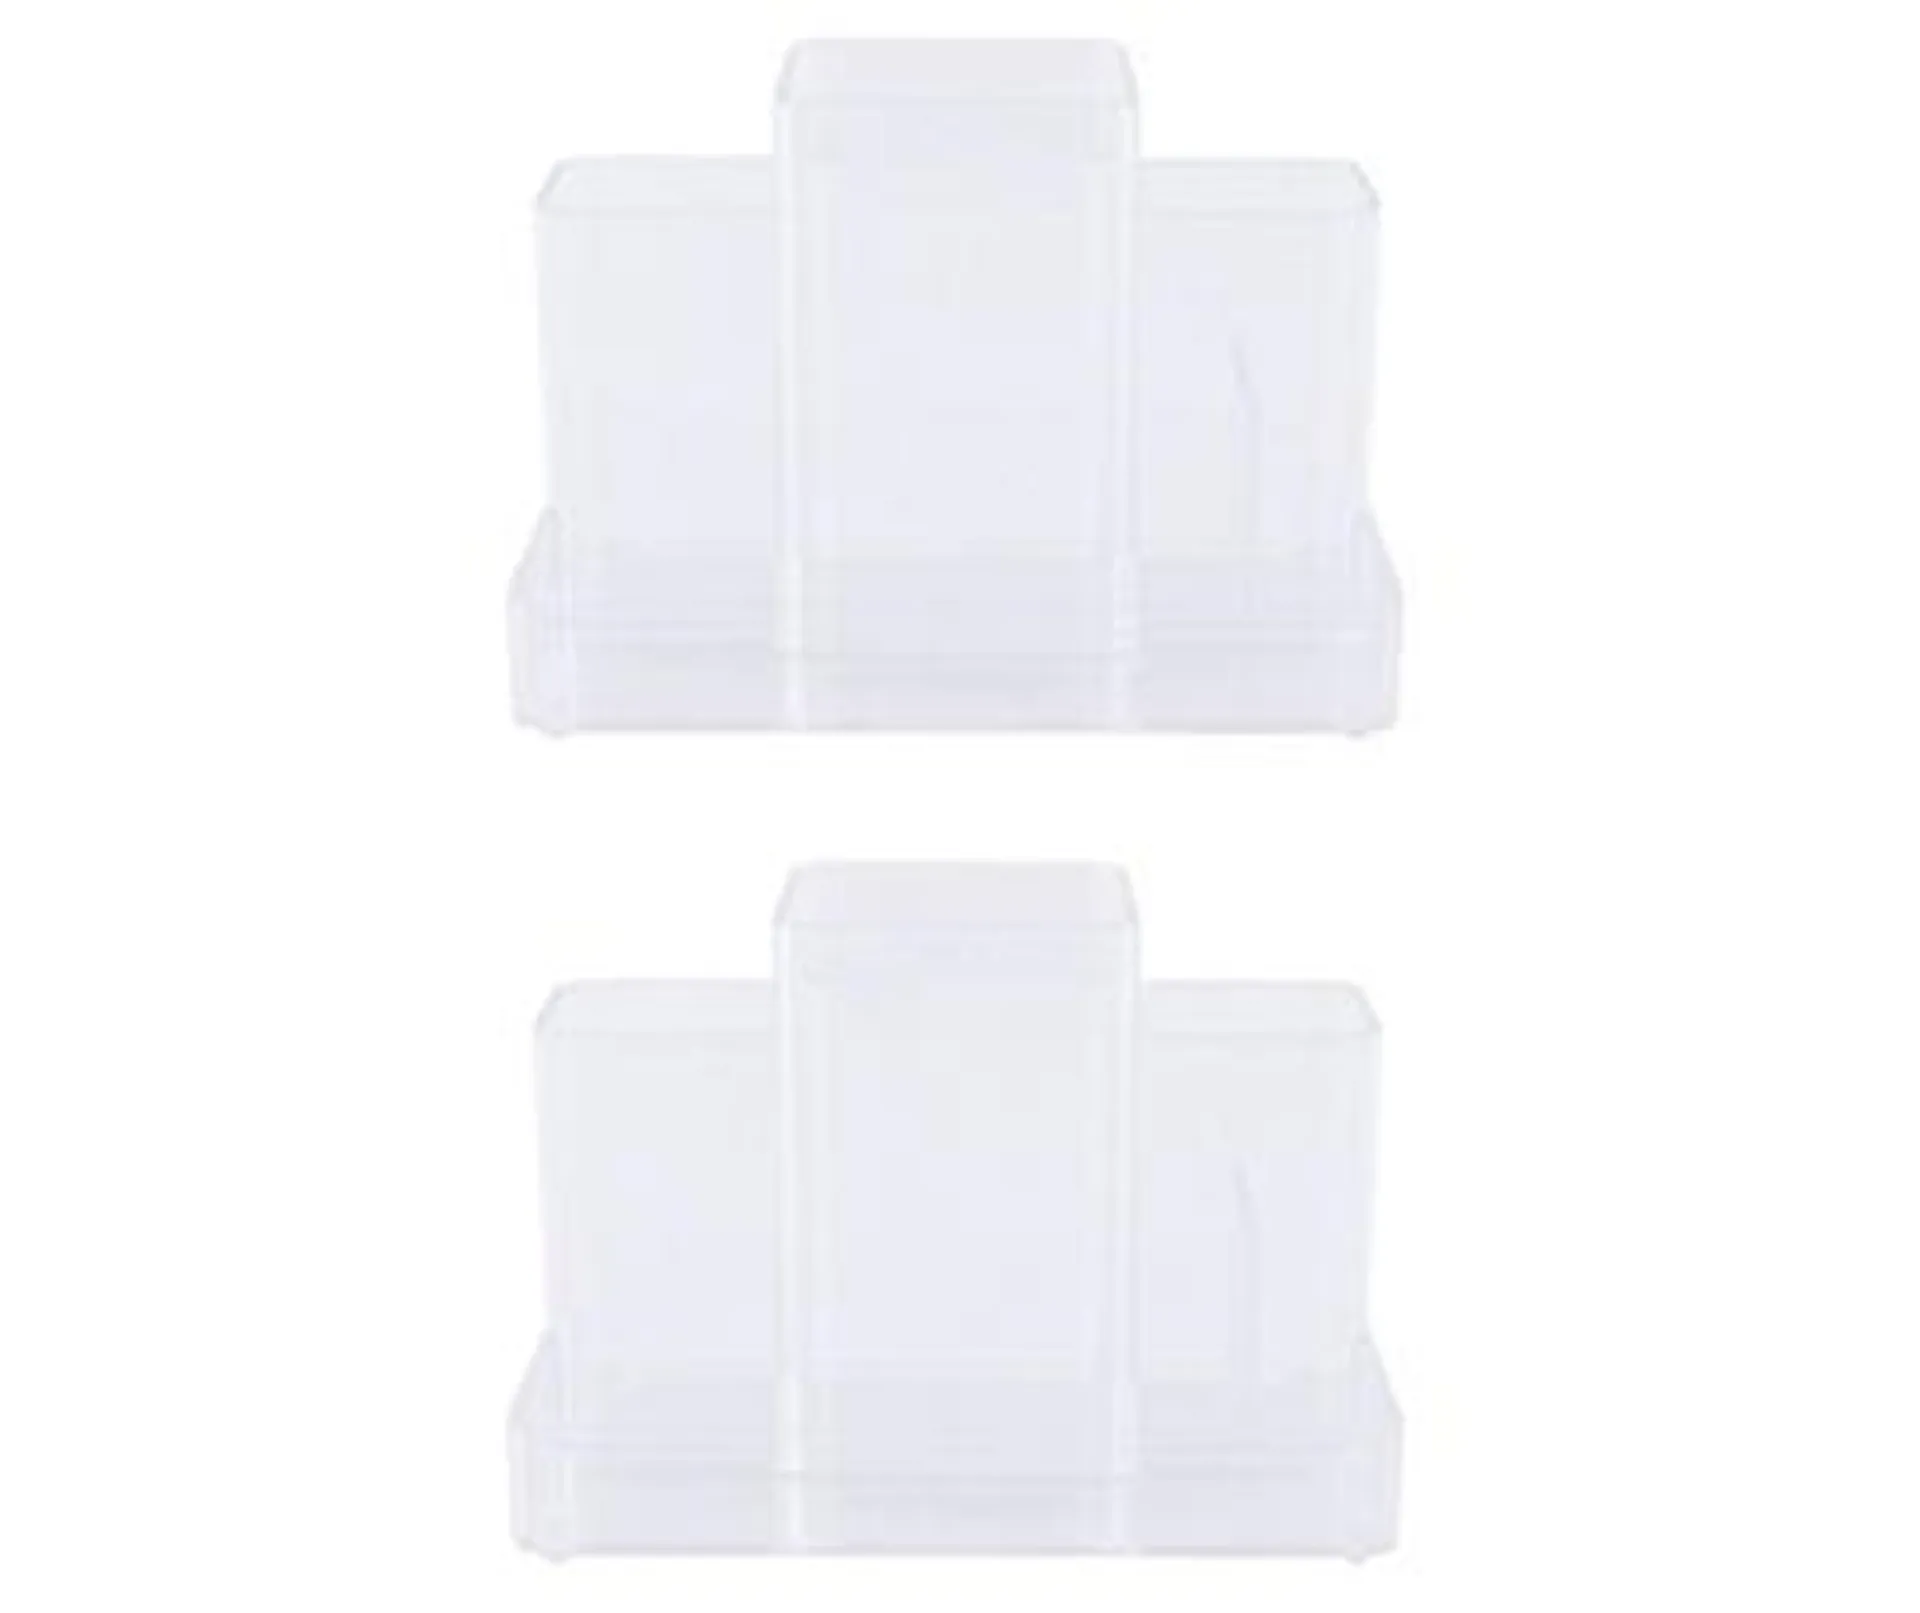 Storage Made Simple Clear Hair Care Bathroom Countertop Organizer, 2-Pack